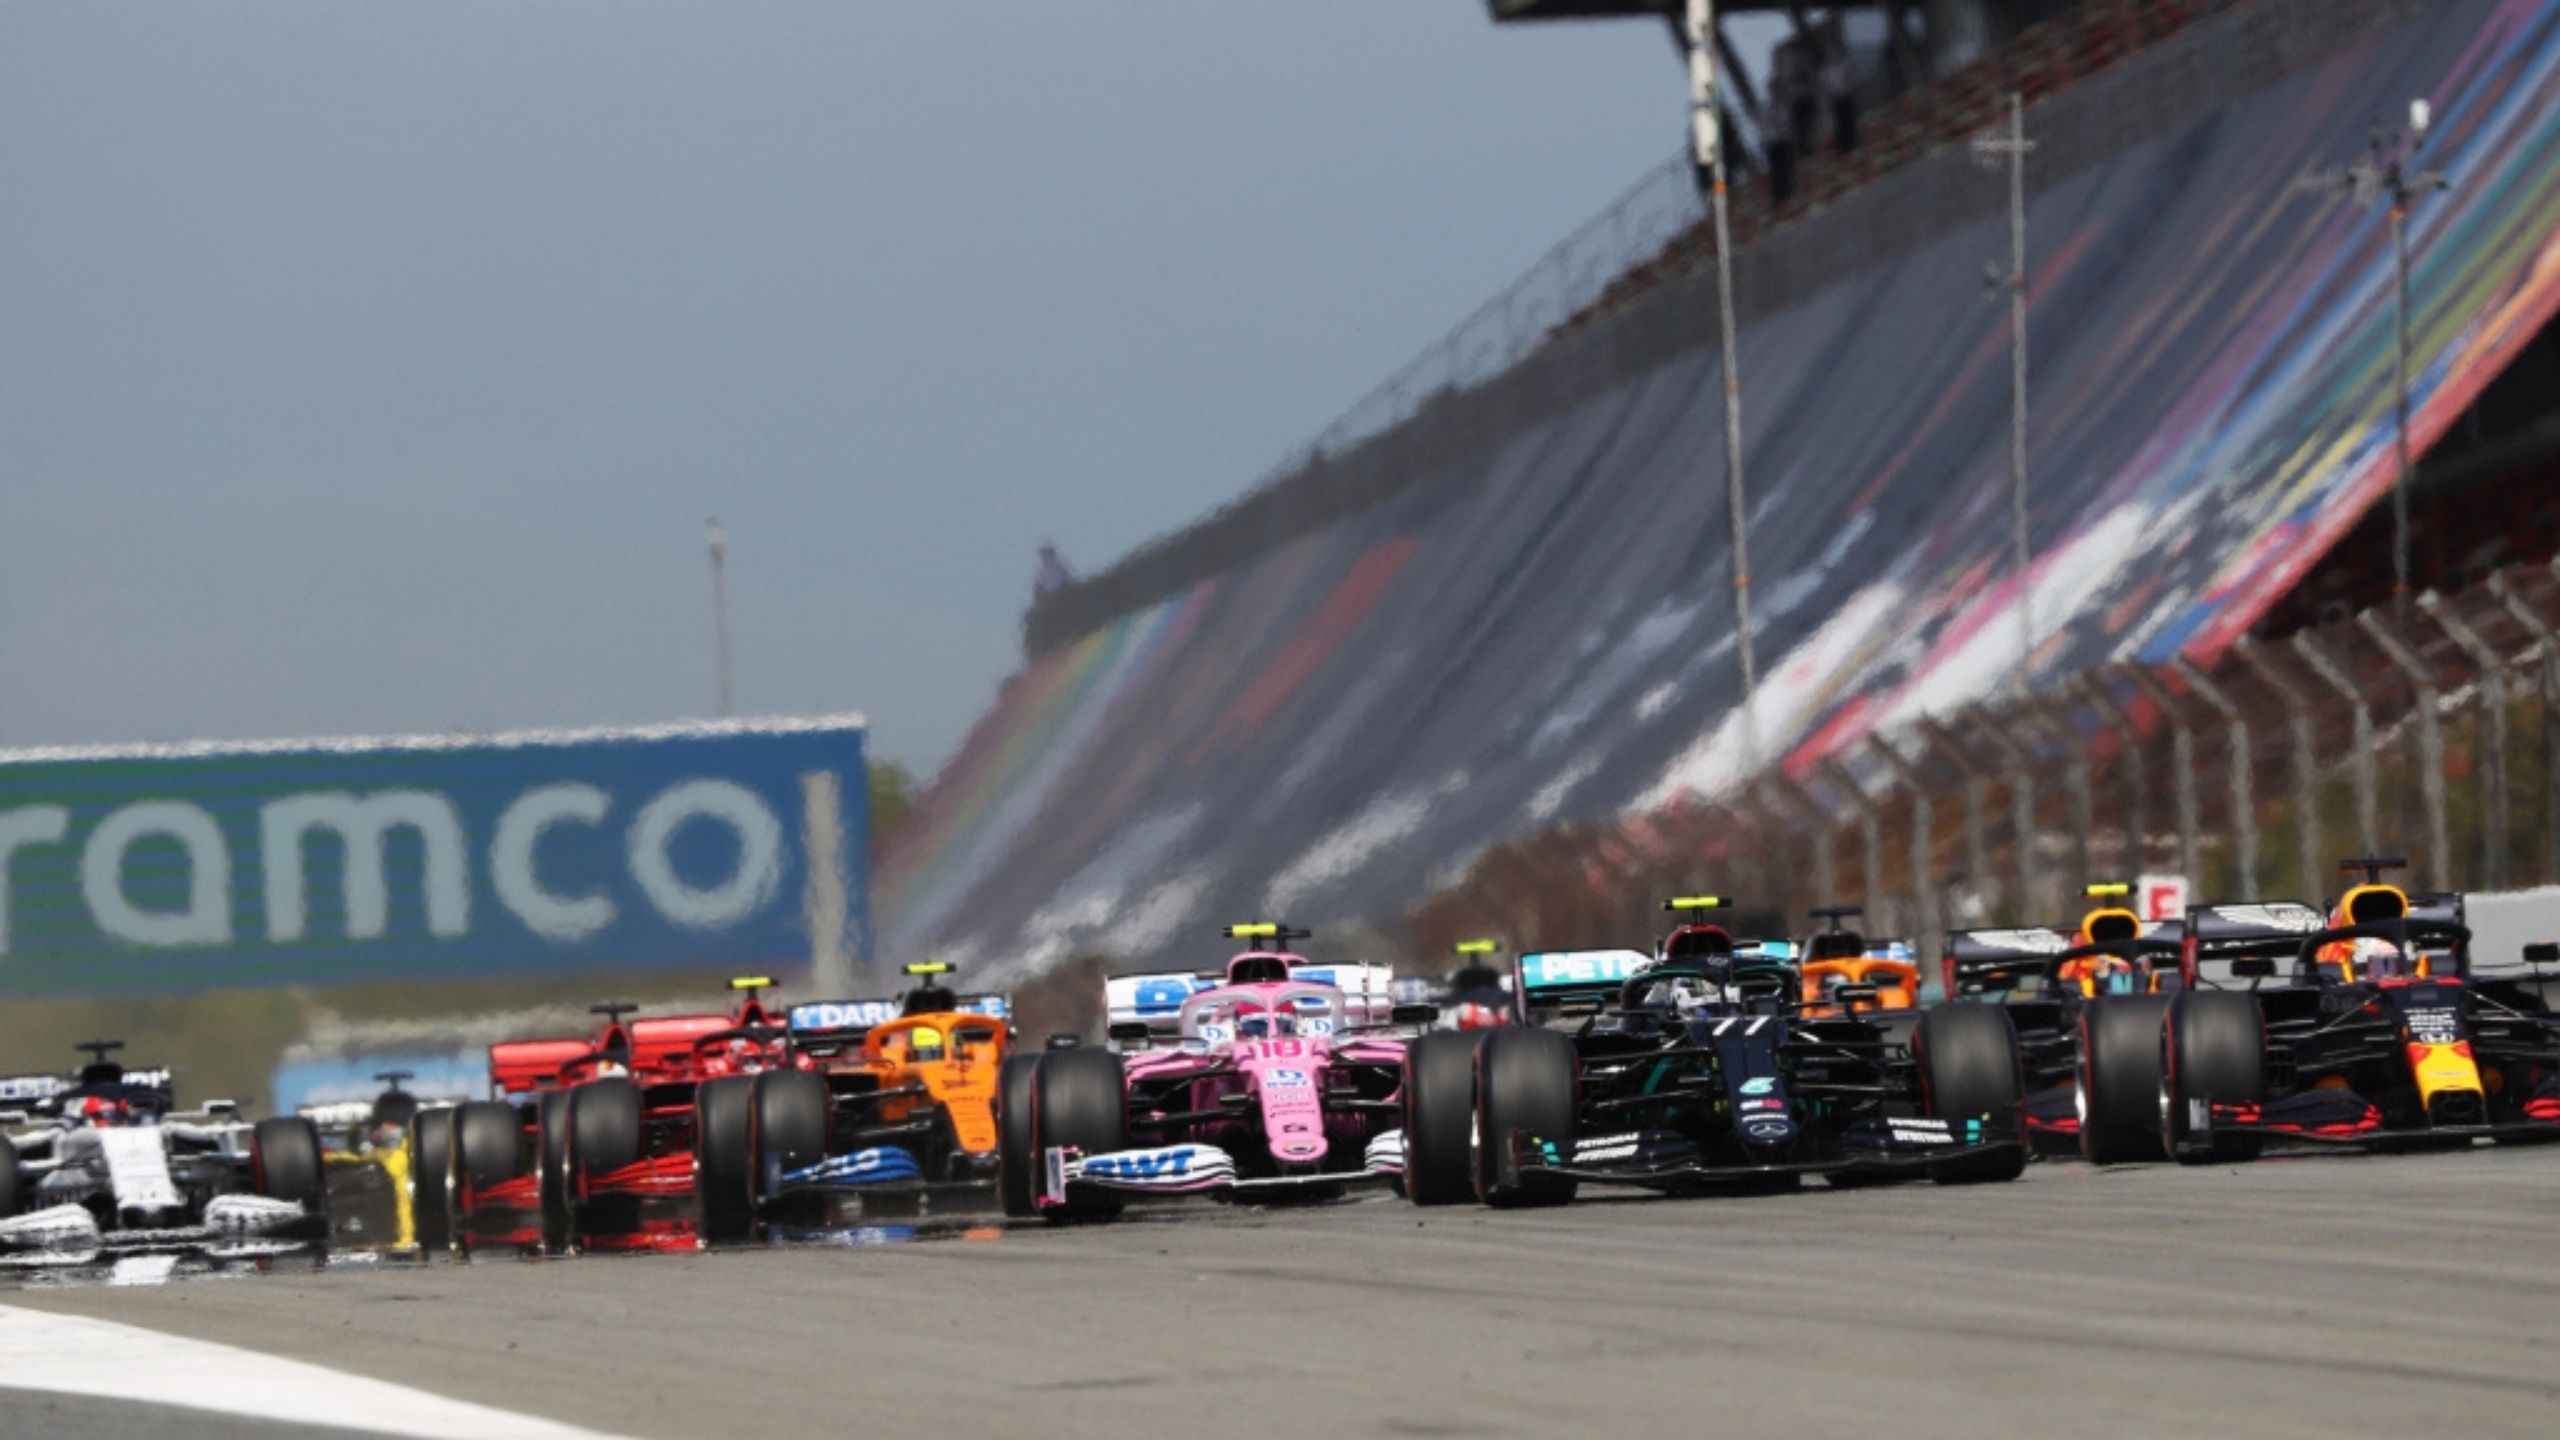 F1 2021 Calendar: Which Races Have Made It To The Longest